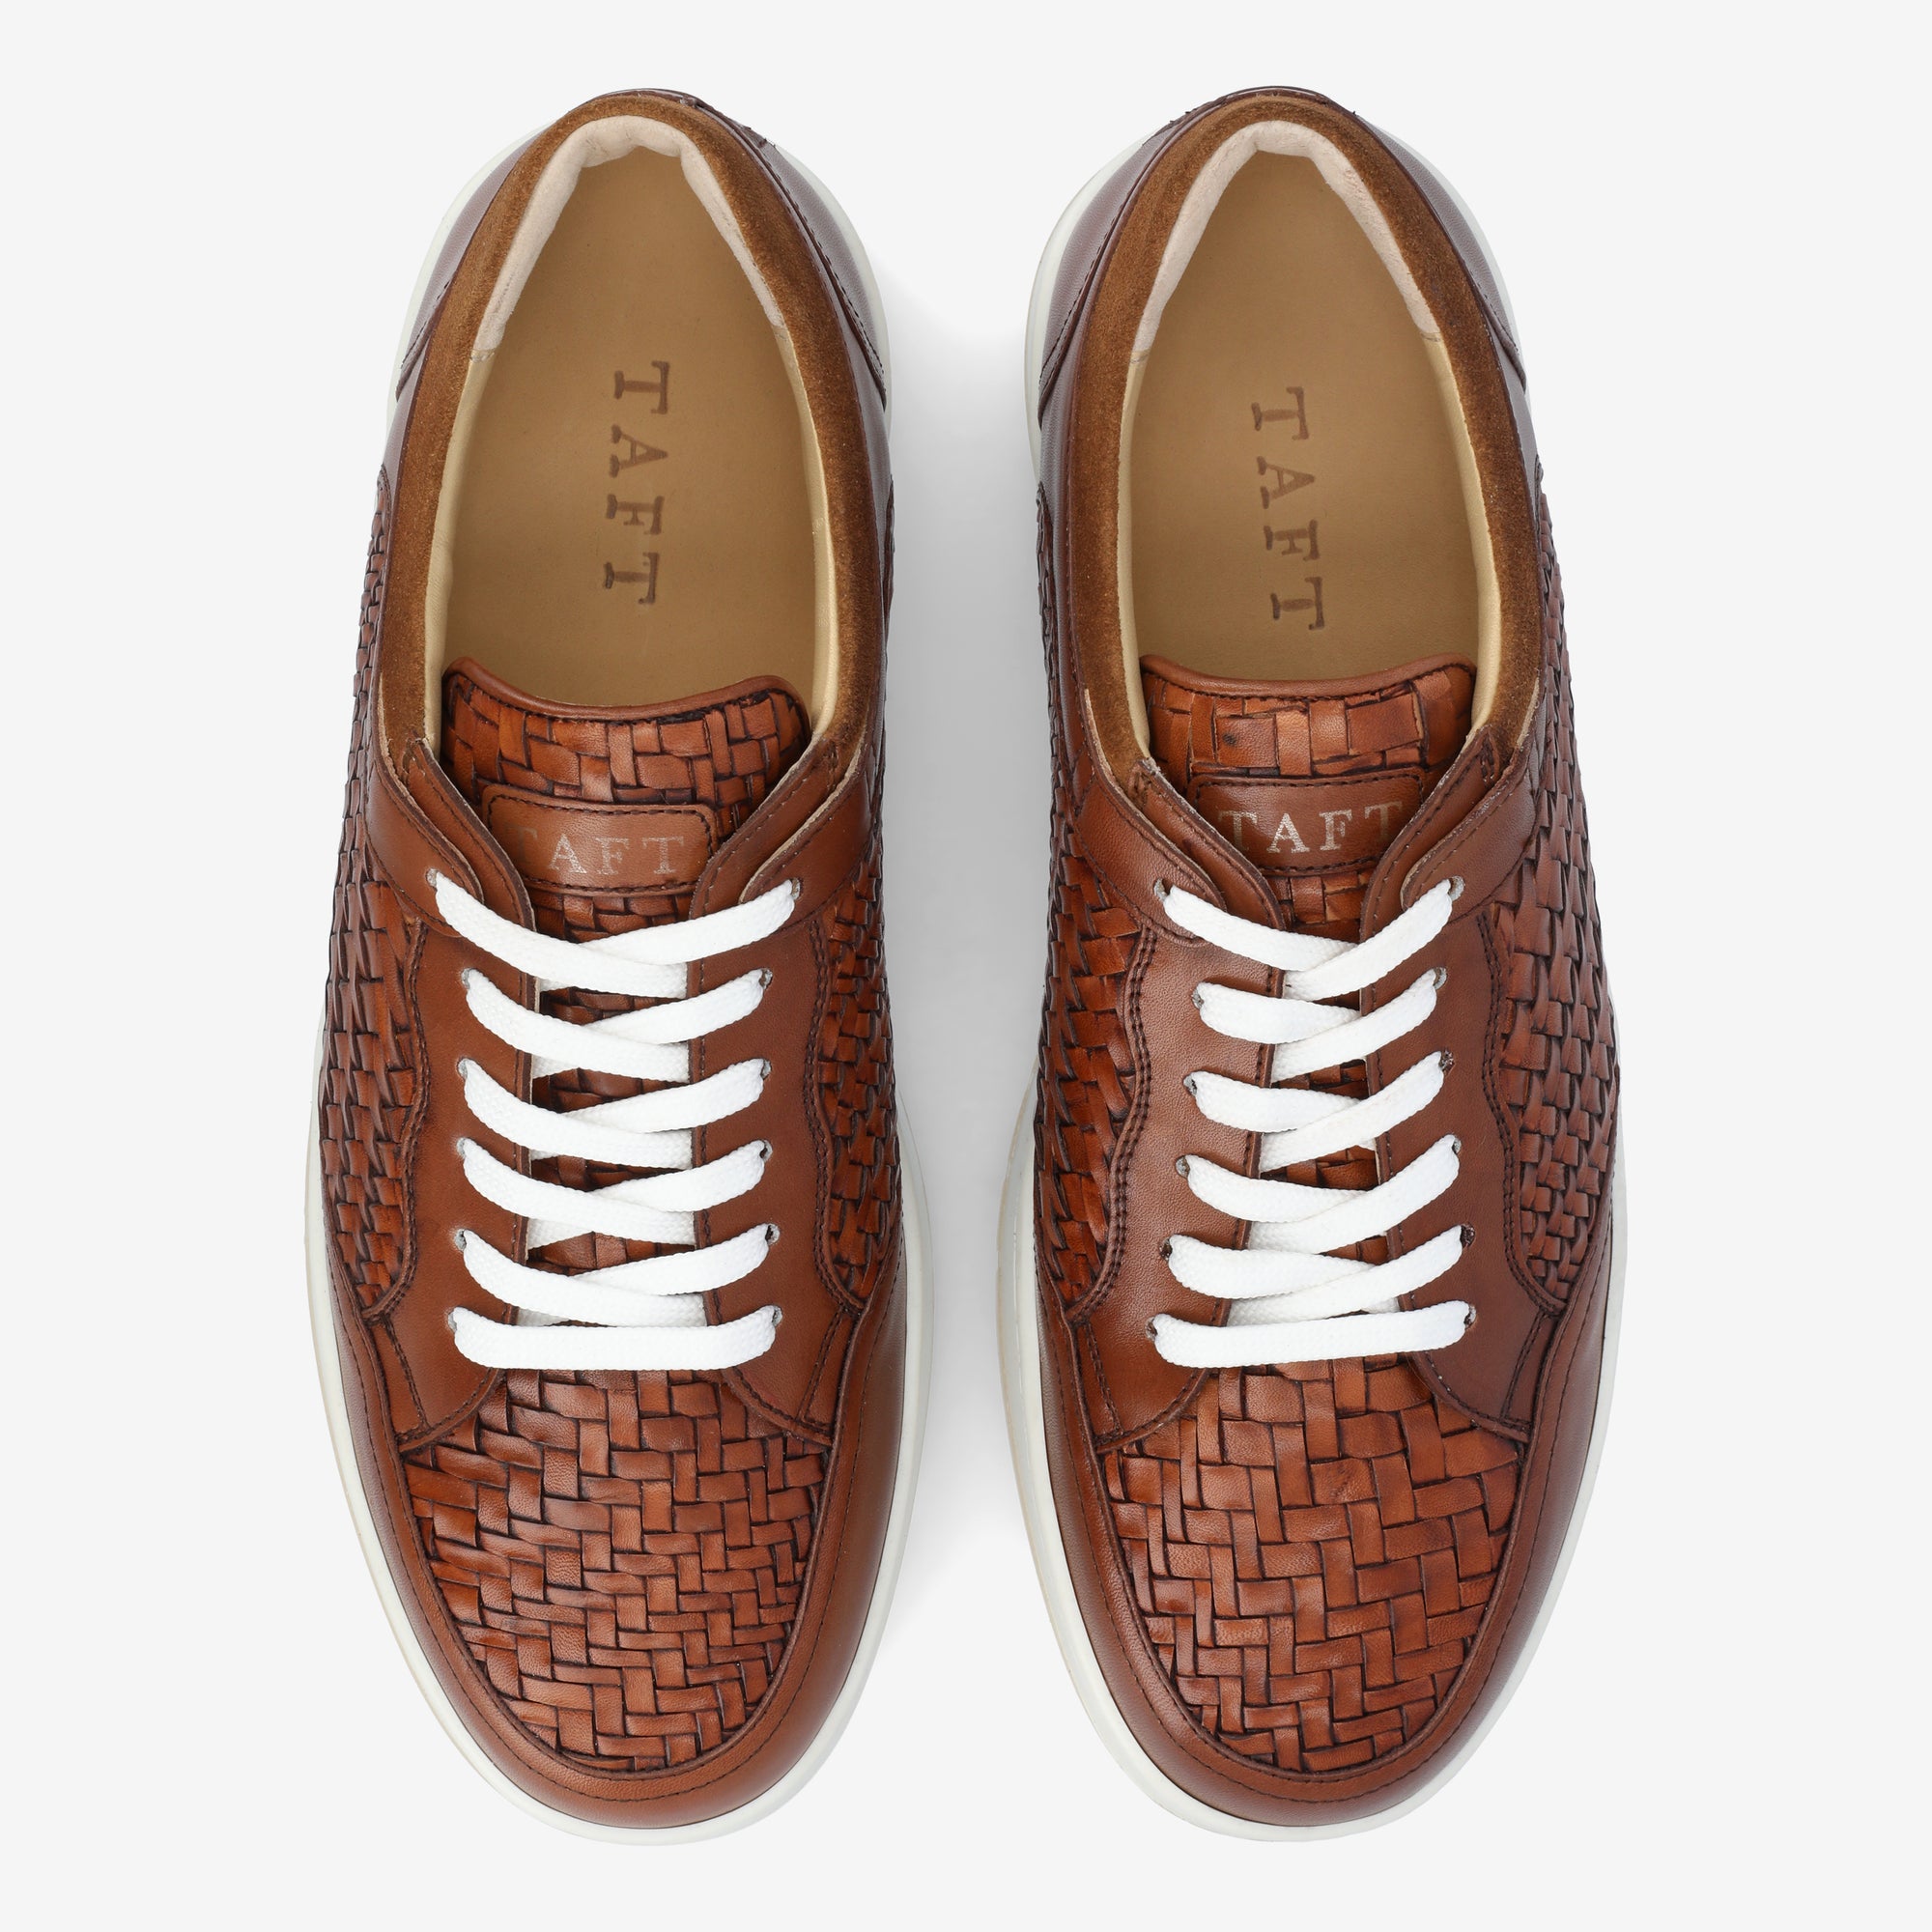 The Rapido Low Sneaker in Brown Woven